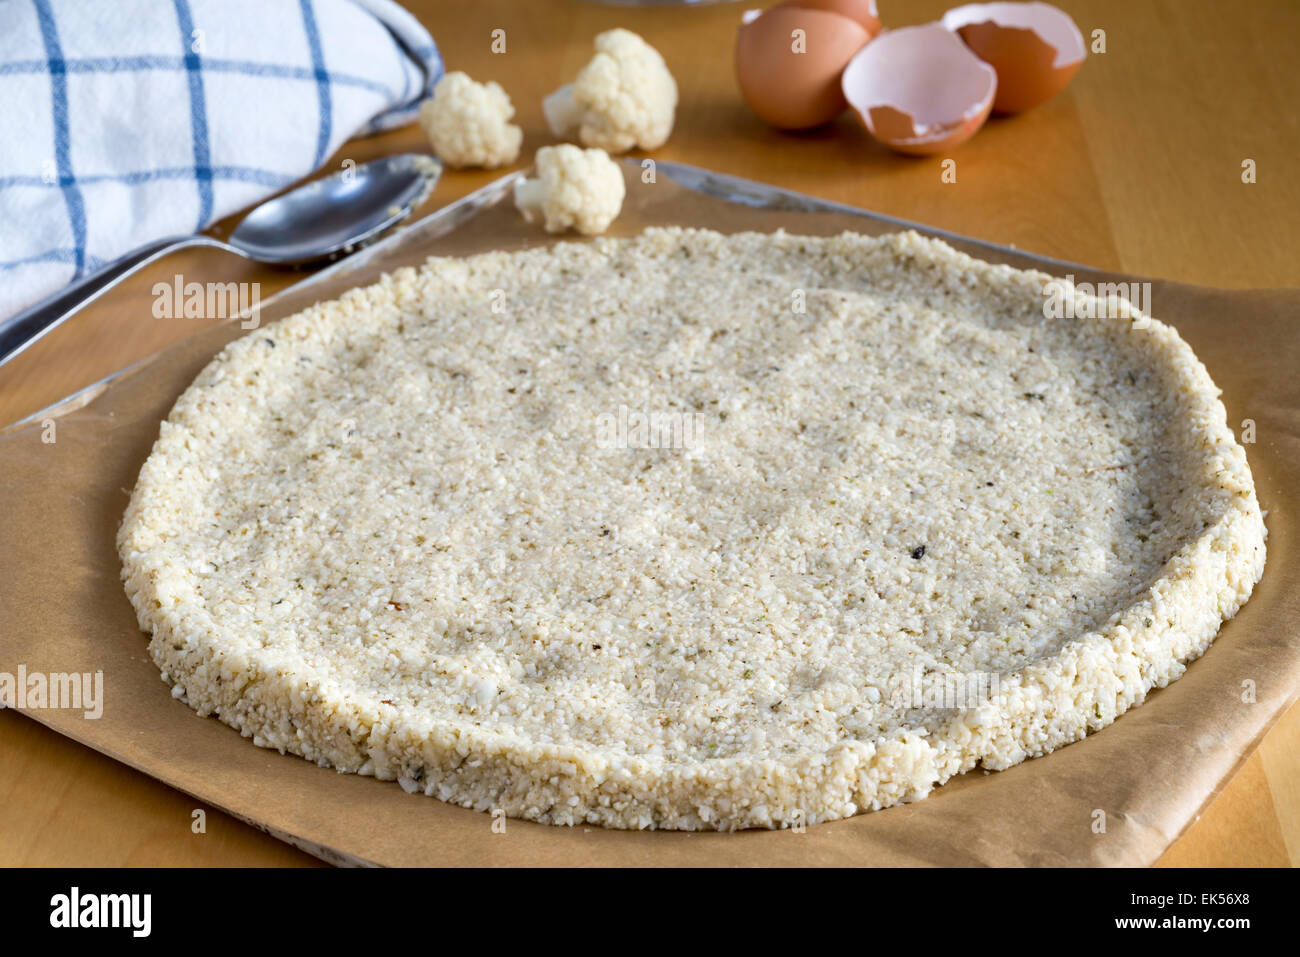 Pizza crust made from cauliflower 'rice' and eggs rather than traditional bread dough. Stock Photo